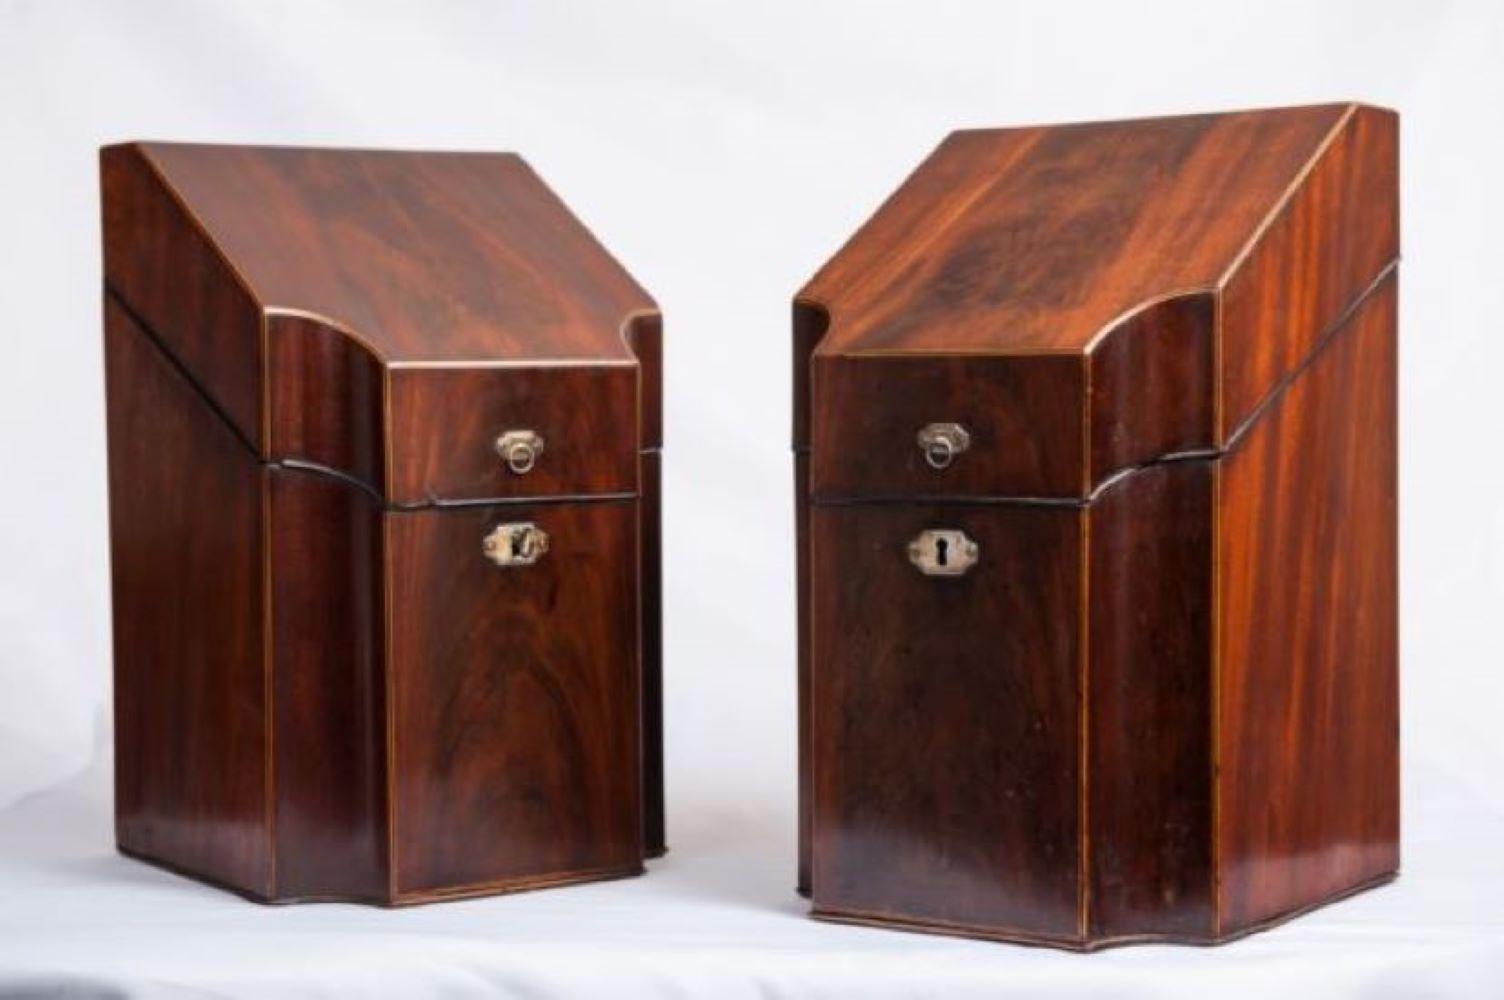 Pair of 18th century Georgian, mahogany knife boxes or cutlery cases. The interiors fitted with original compartments to hold knives forks and spoons,. Inlaid with boxwood stringing. The exteriors in a lovely richly grained mahogany bordered with